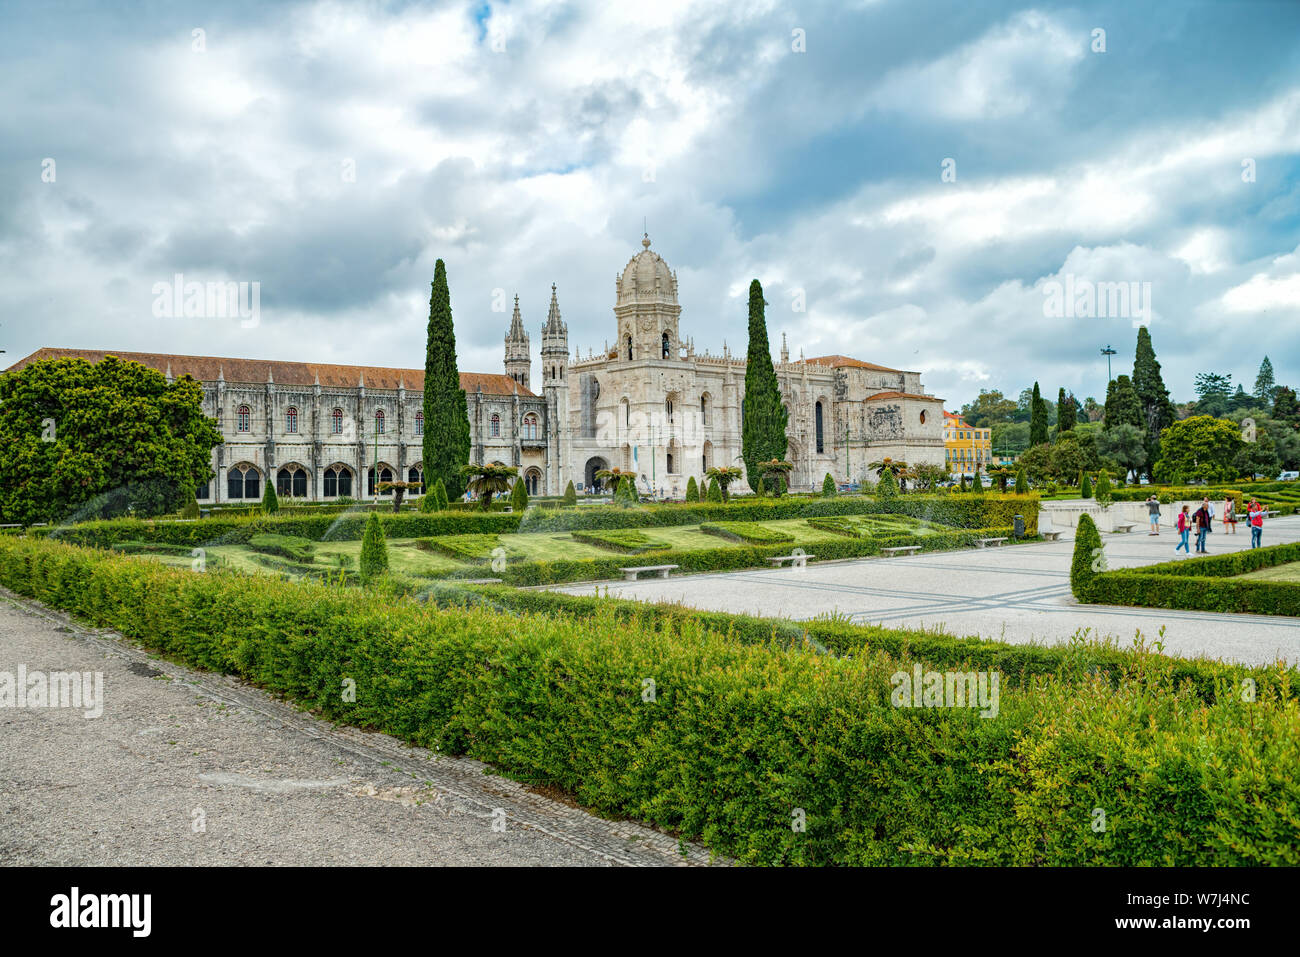 Mosteiro dos Jeronimos in Lisbon, Portugal. The monastery is one of the most prominent examples of the Portuguese Late Gothic Manueline style of archi Stock Photo